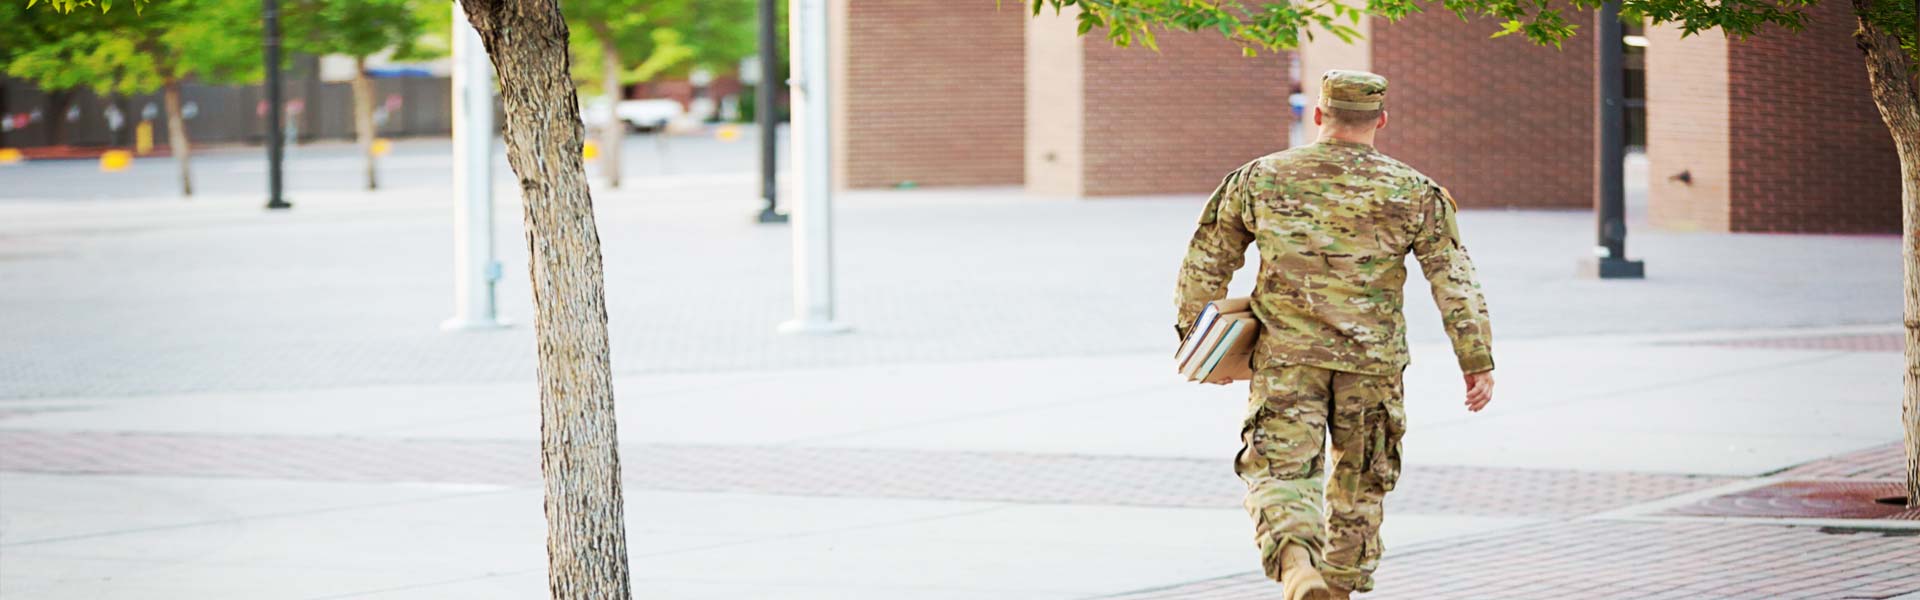 Service member walking away carrying college books